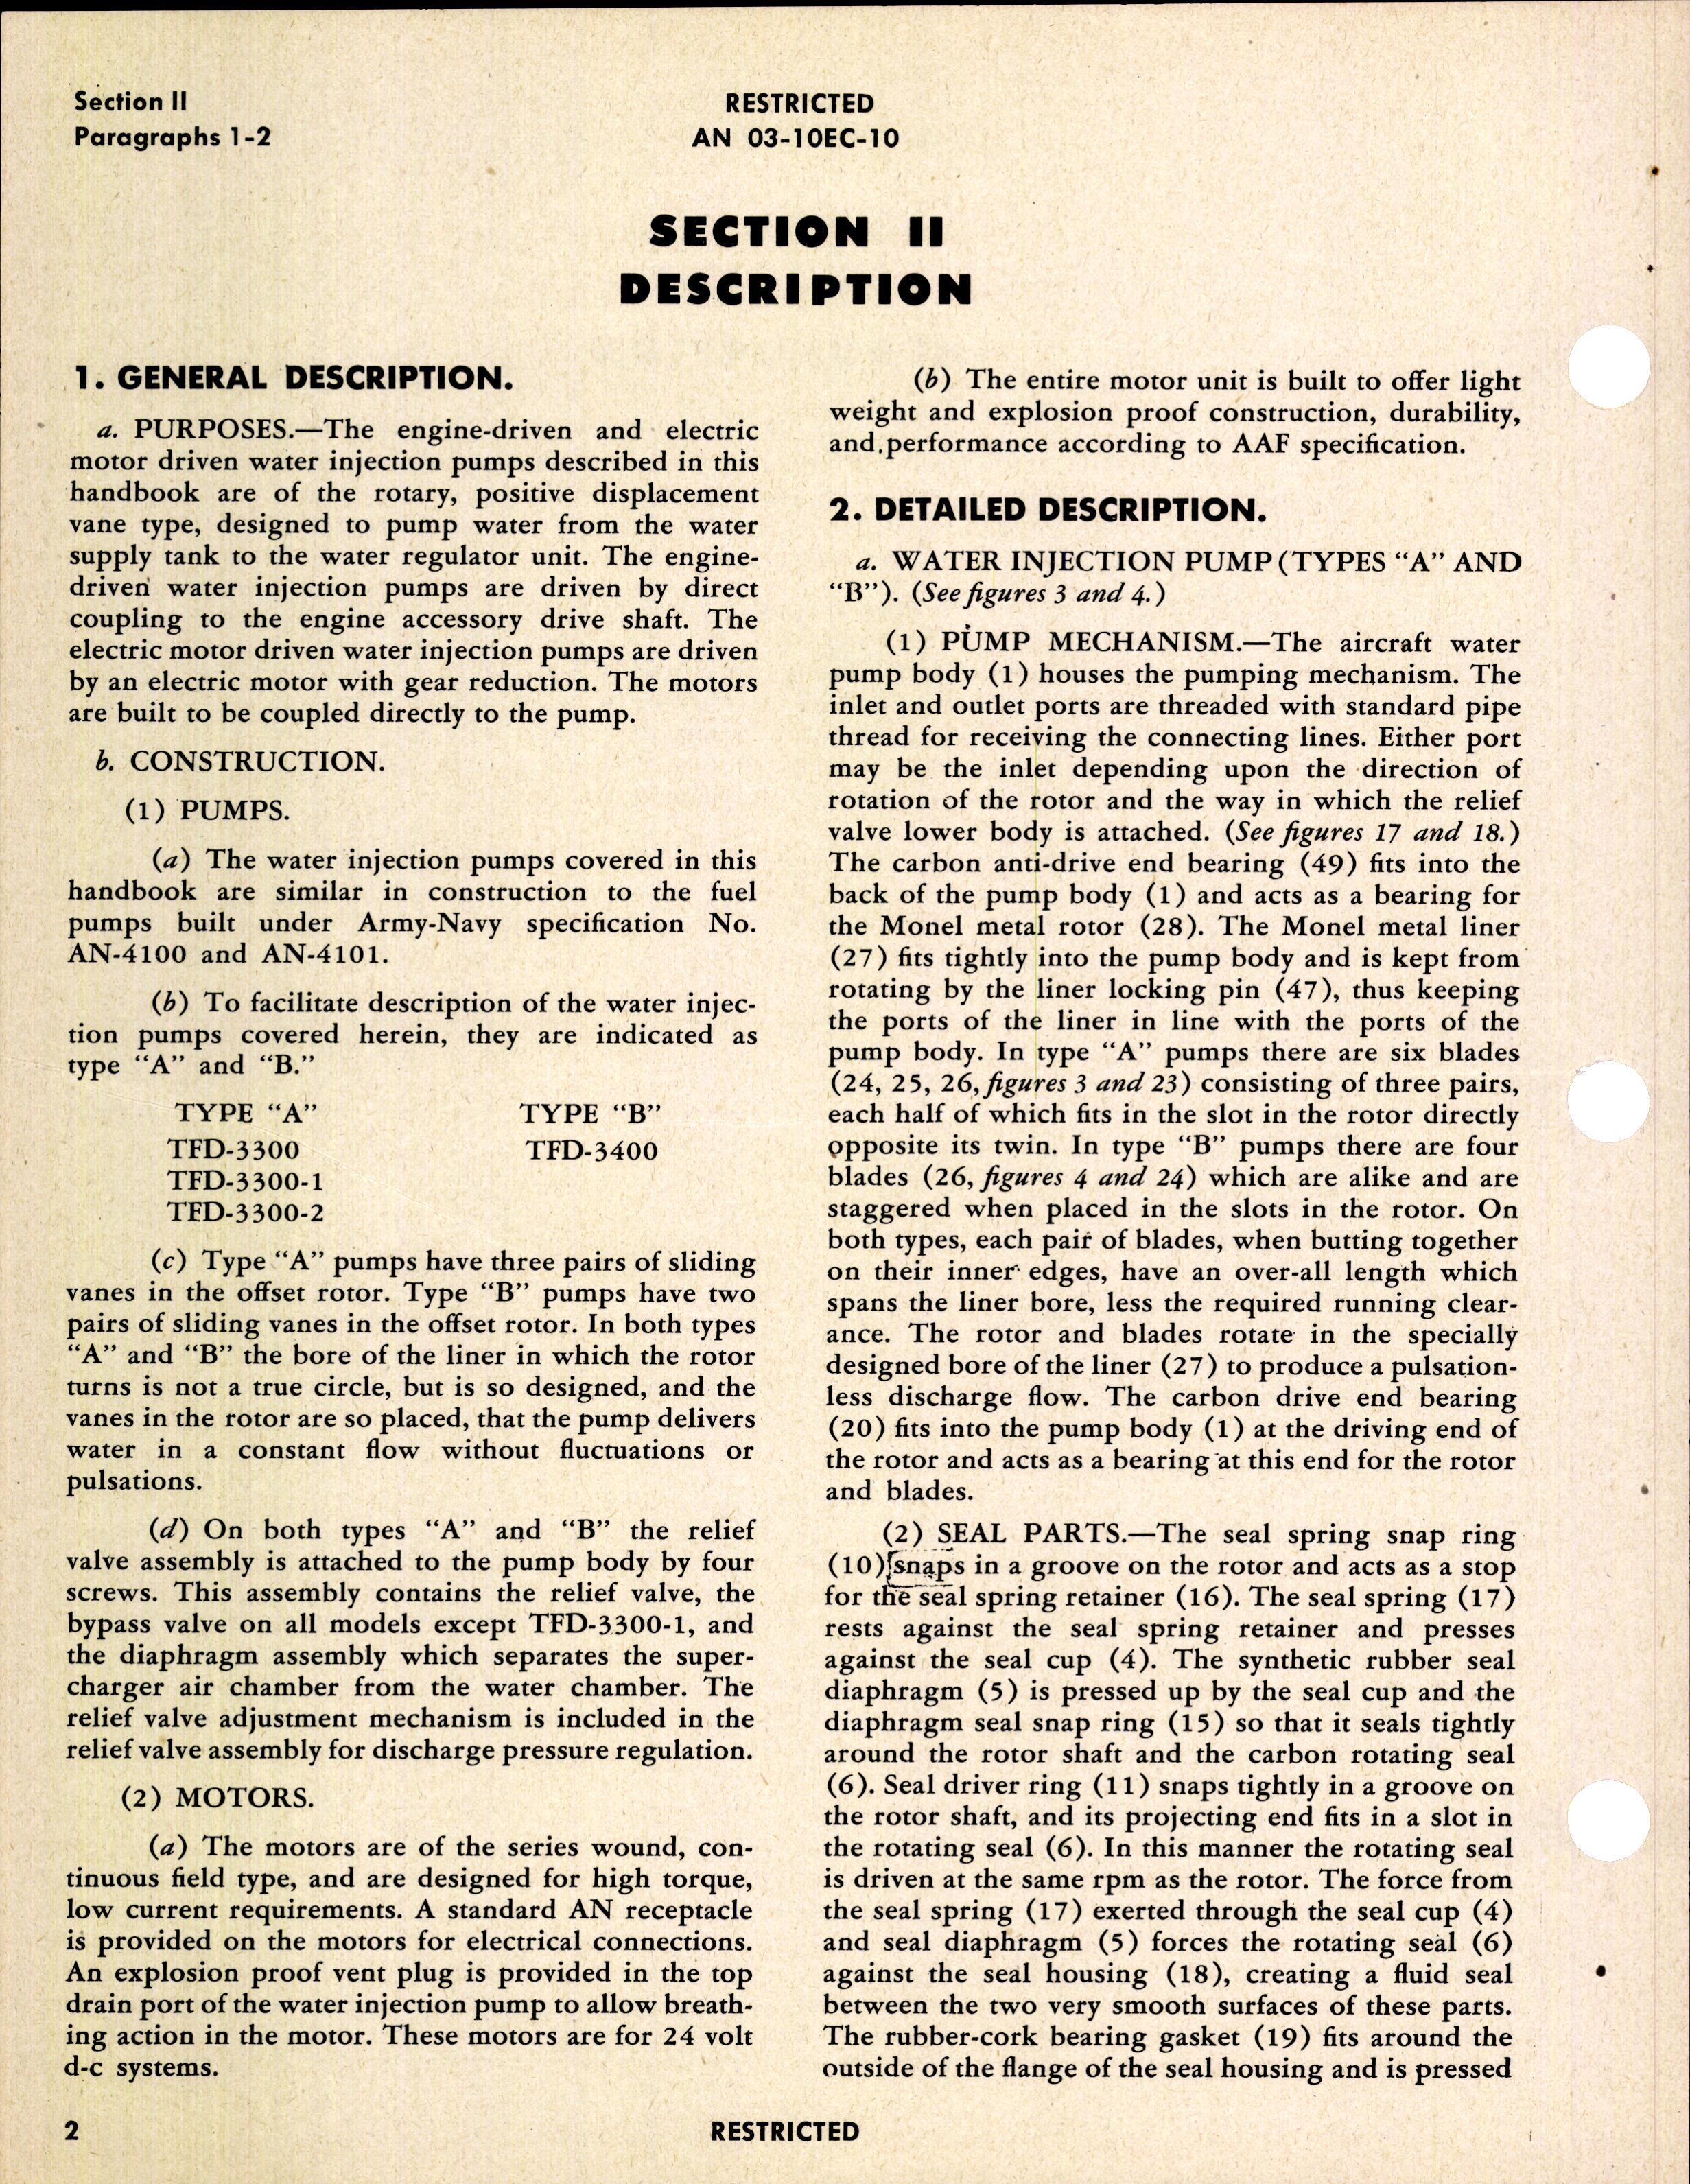 Sample page 6 from AirCorps Library document: Operation, Service, & Overhaul Instructions with Parts Catalog for Engine-Driven & Electric Motor Driven Water Injection Pumps